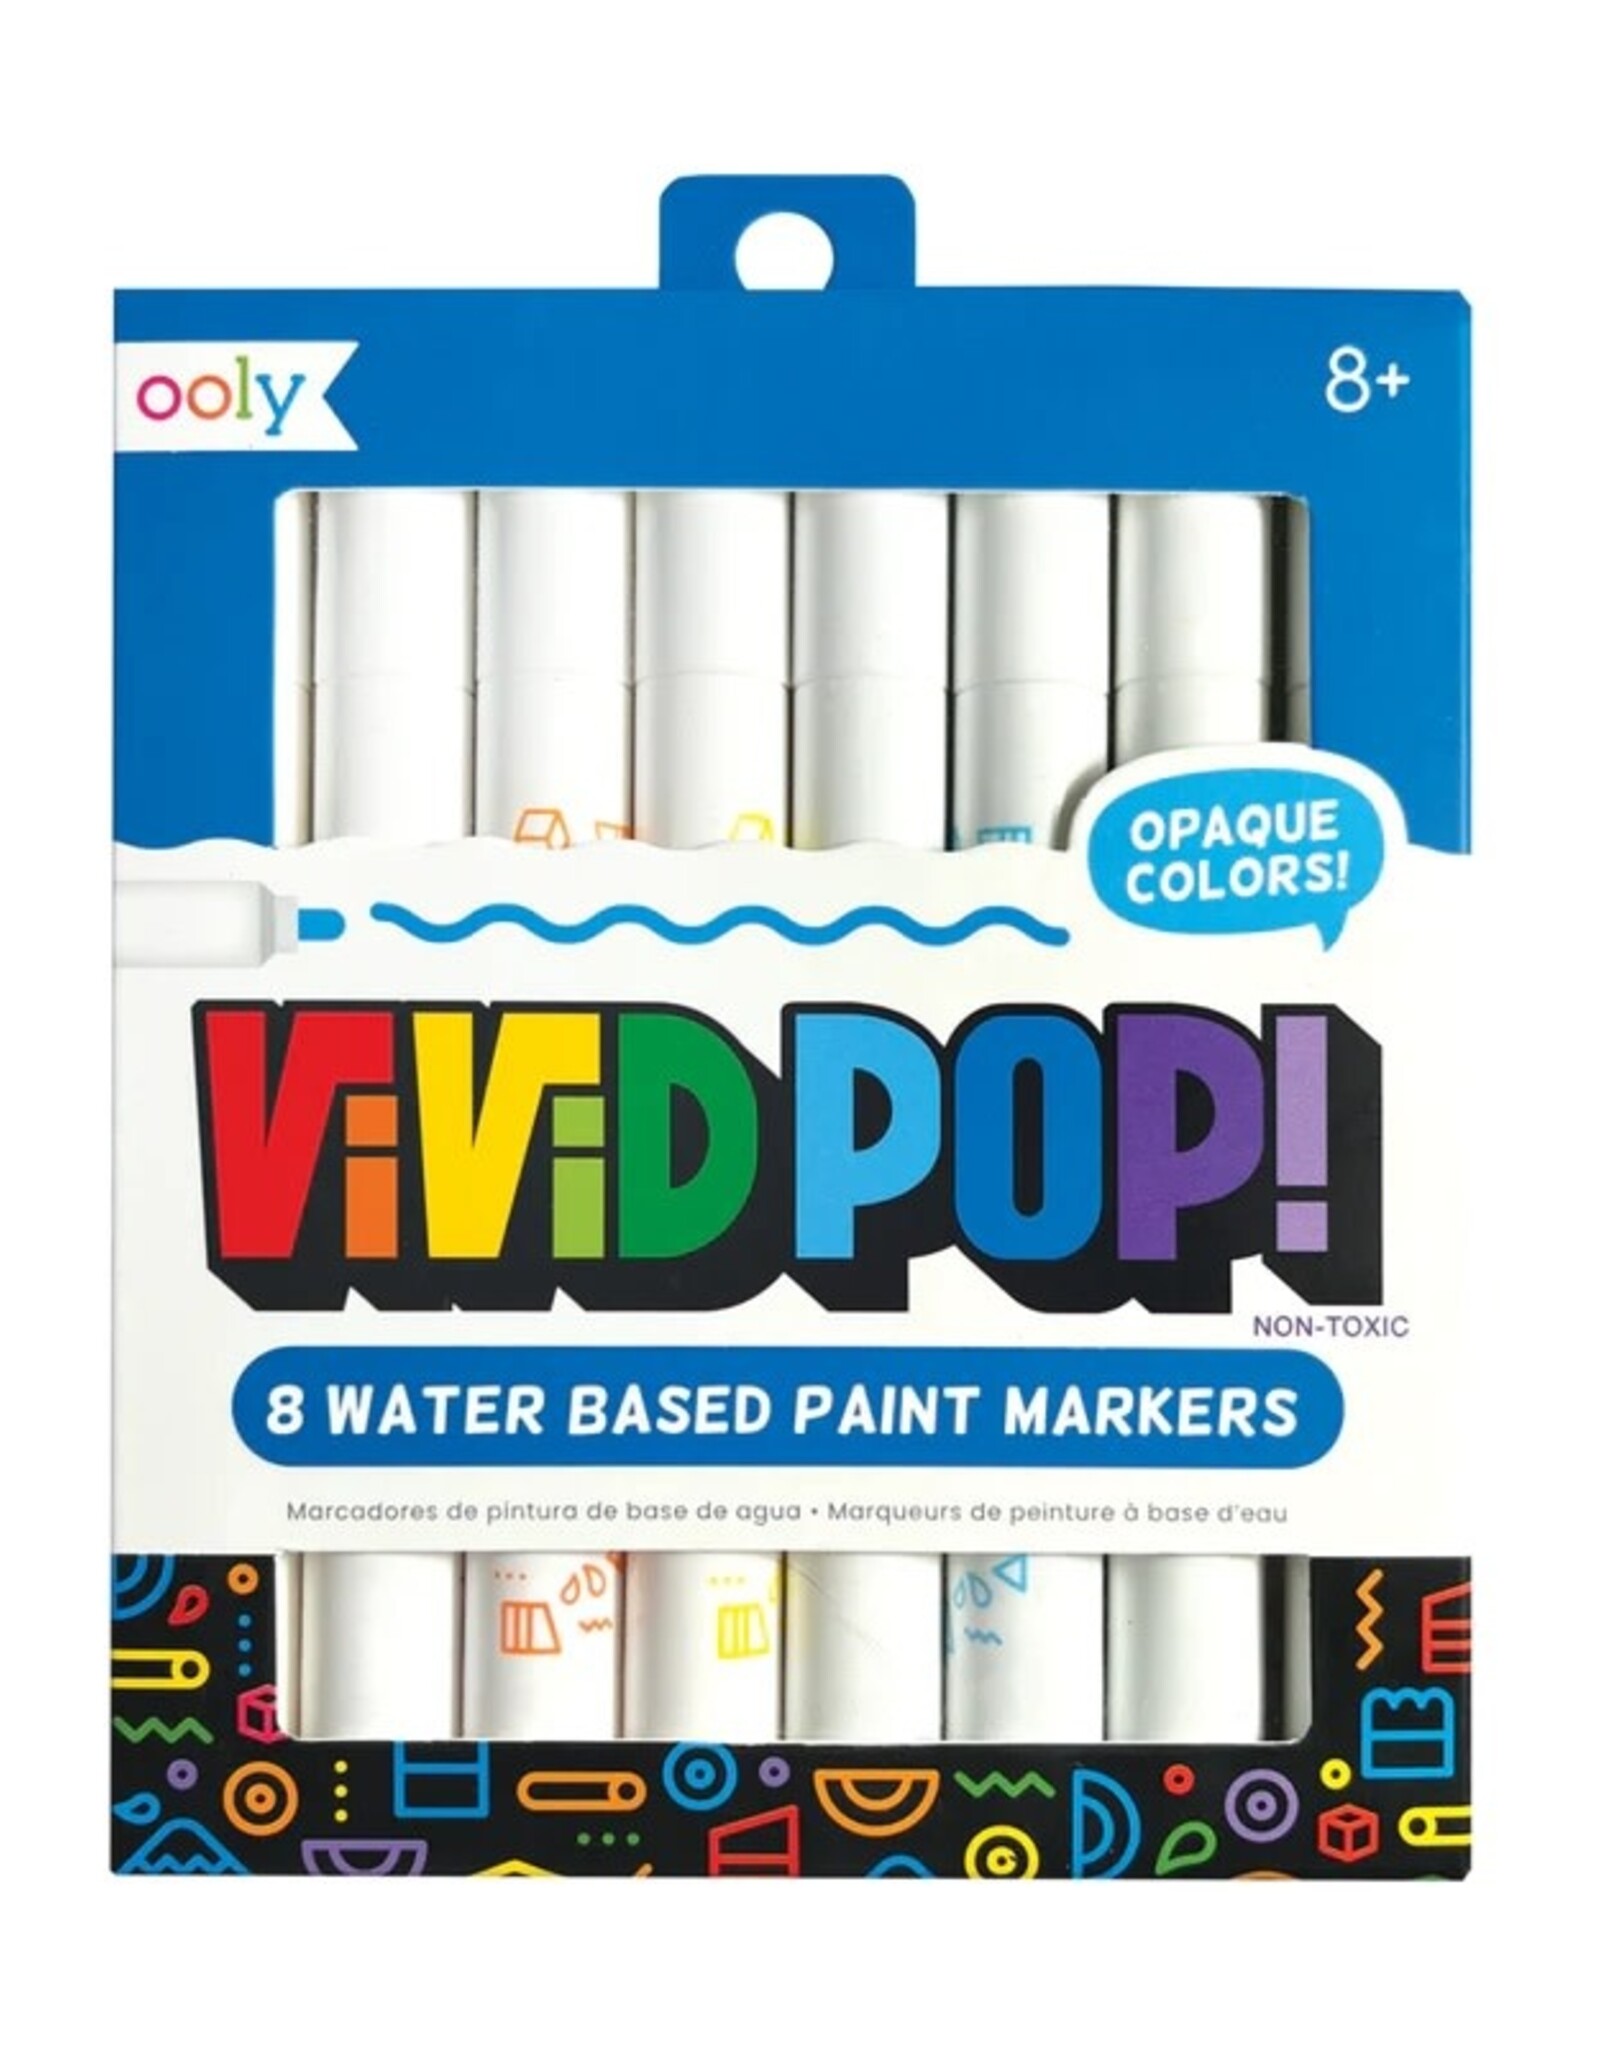 OOLY VIVID POP! WATER BASED PAINT MARKERS - 8 COLORS